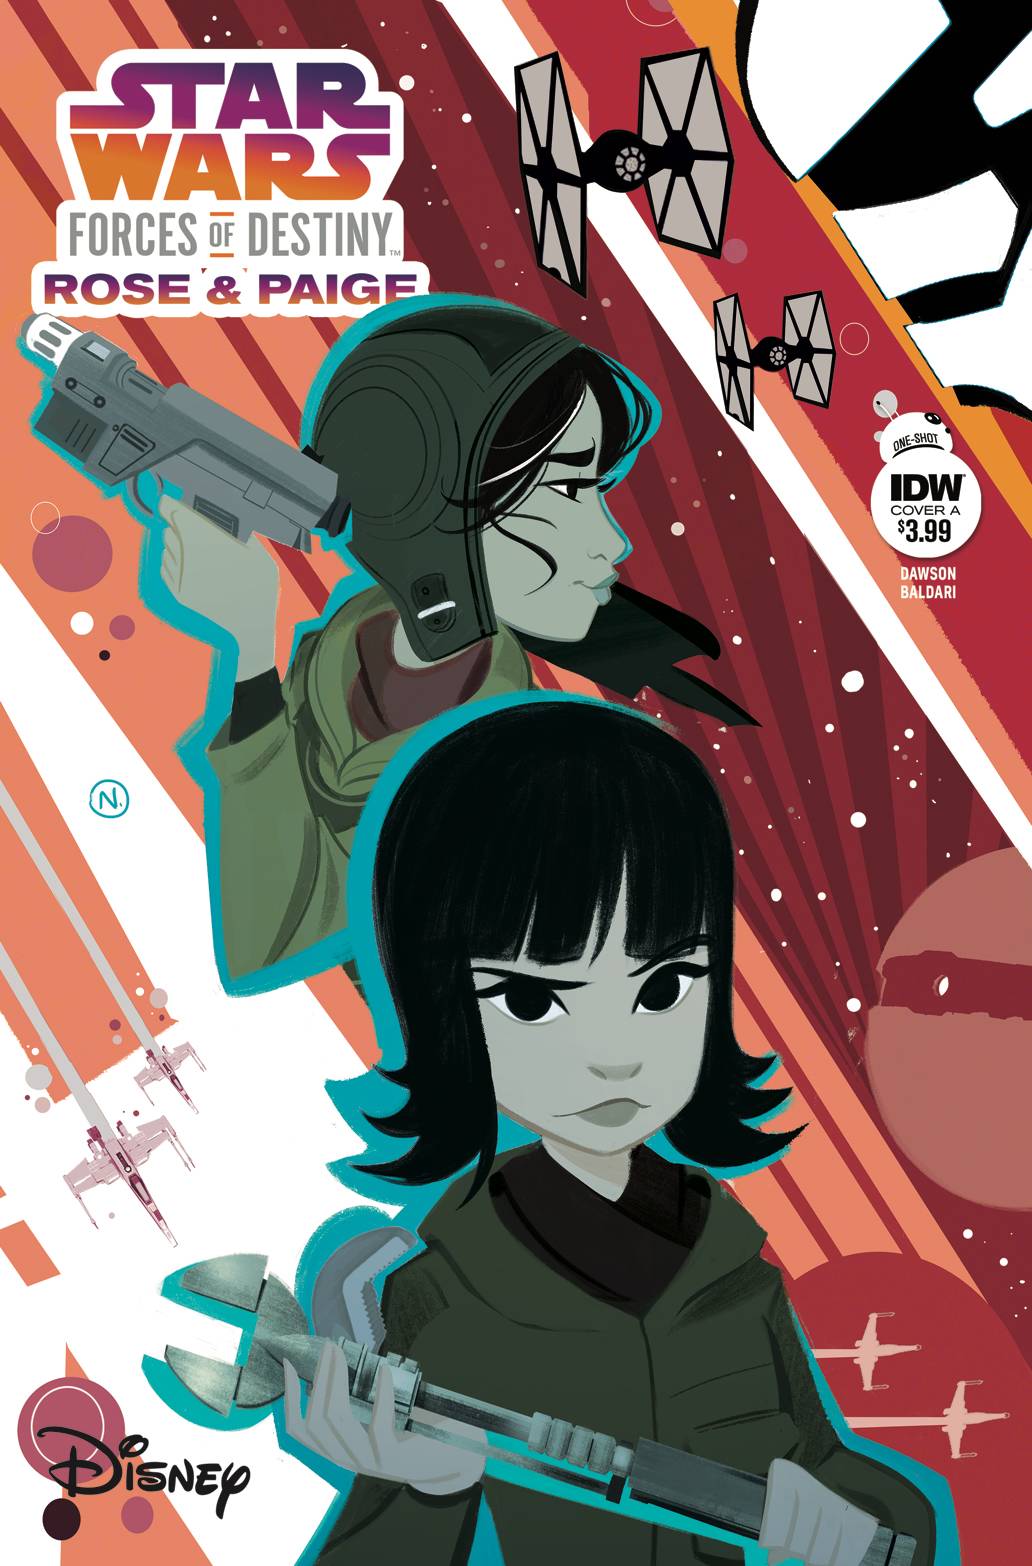 Star Wars Adventure Forces of Destiny Rose & Paige #1 Cover A